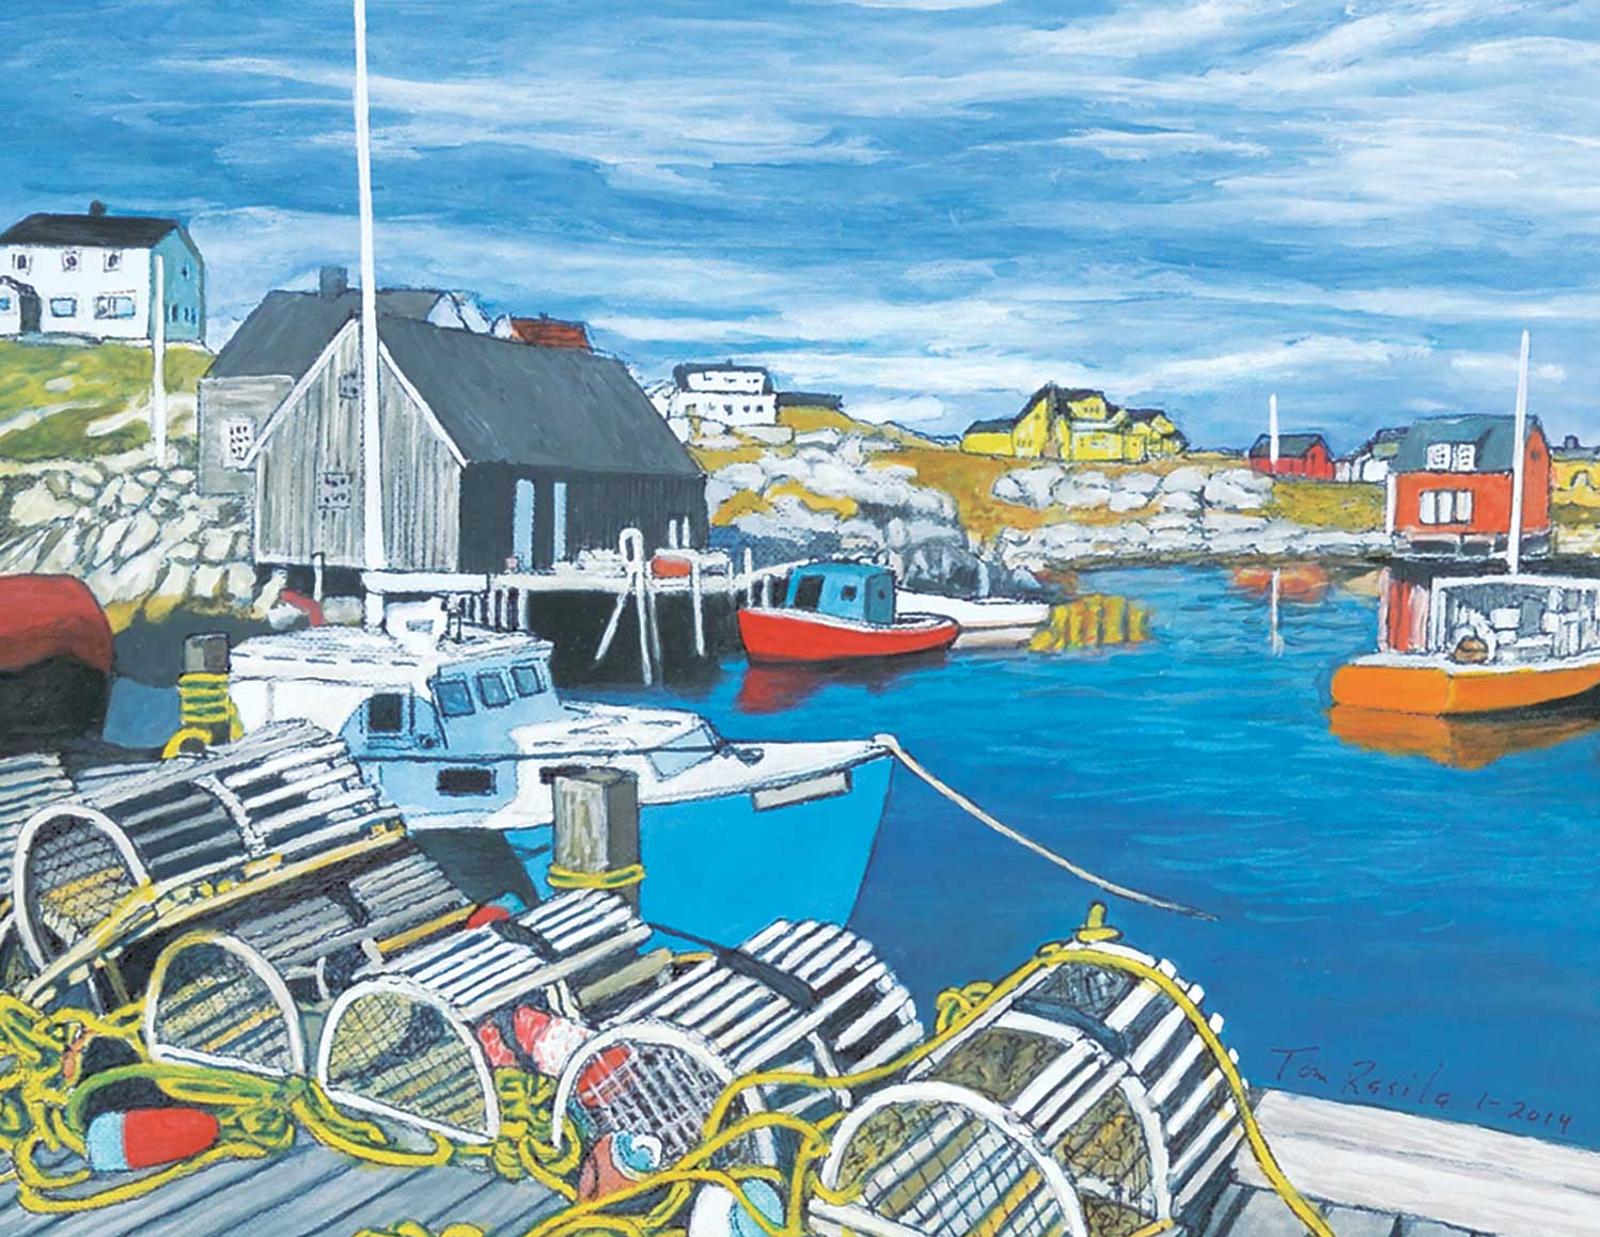 Tom Rasila - Untitled - Lobster Traps, Peggy's Cove